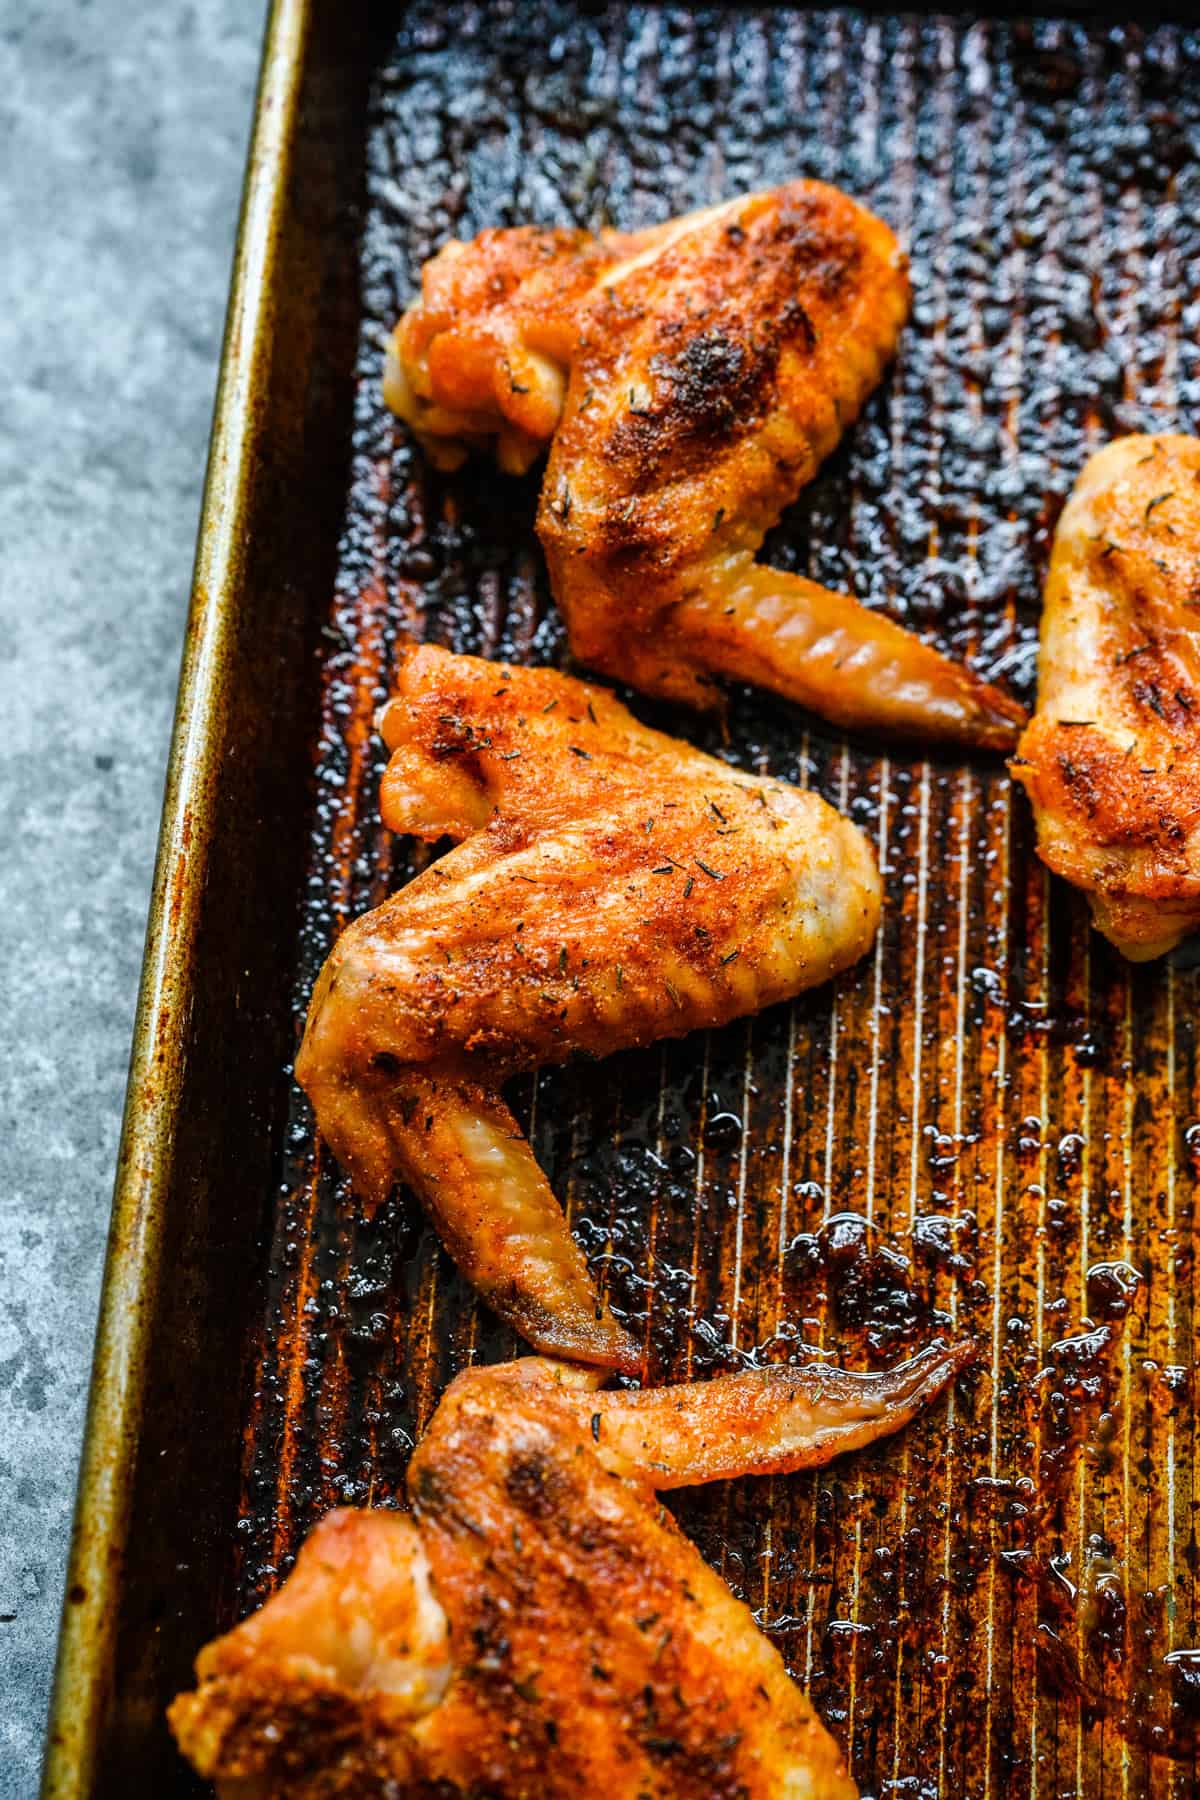 Three baked chicken wings on a sheet pan.